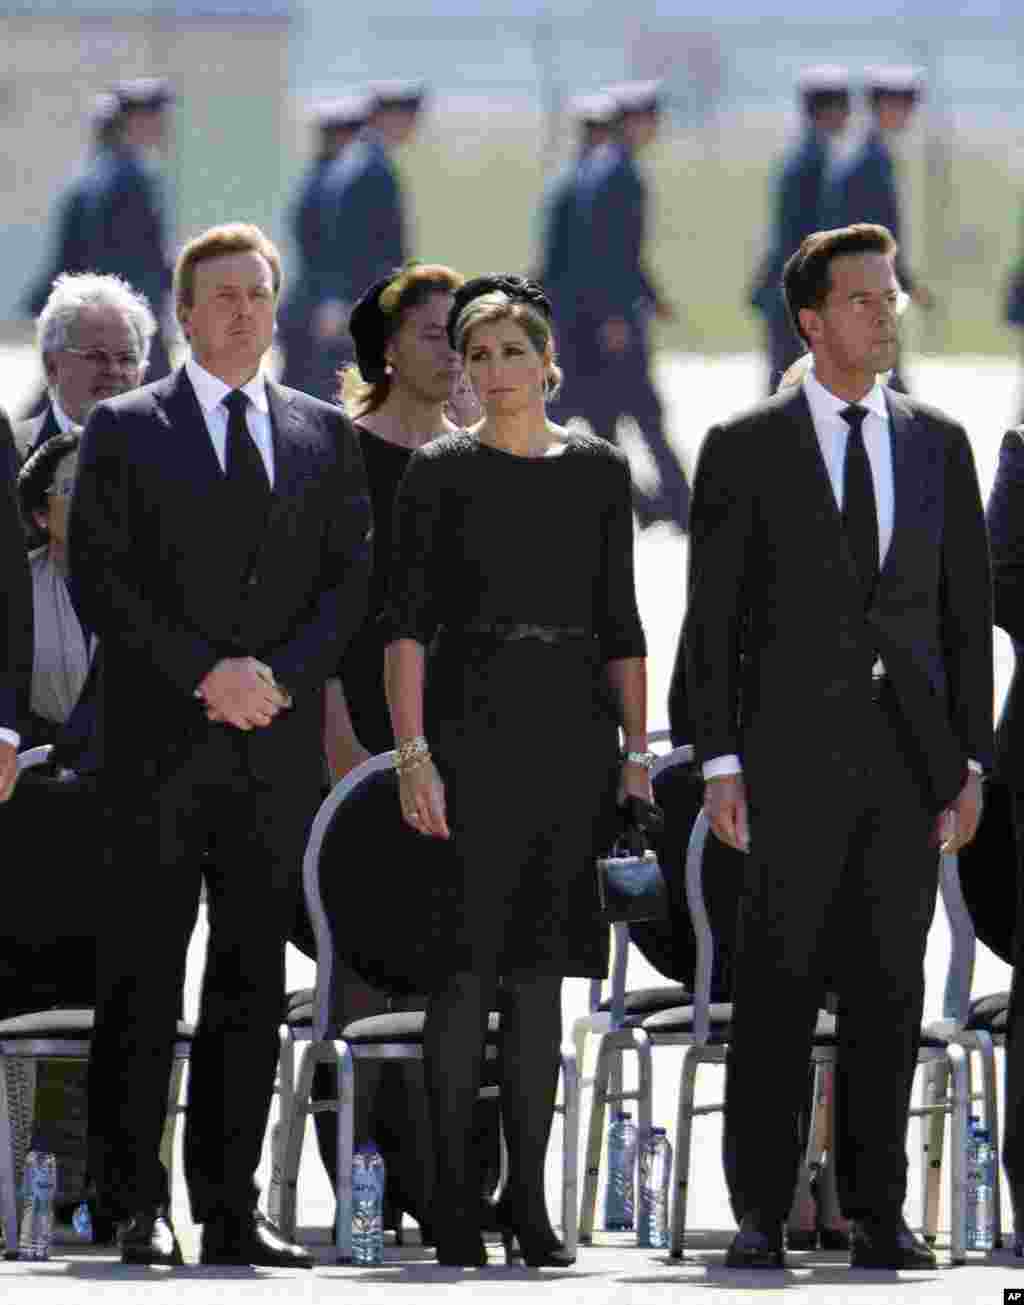 King Willem-Alexander, left, Queen Maxima and Prime Minister Mark Rutte, right, observe a minute of silence during a ceremony to mark the return of the first bodies of passengers and crew killed in the downing of Malaysia Airlines Flight 17, Eindhoven, Netherlands, July 23, 2014.